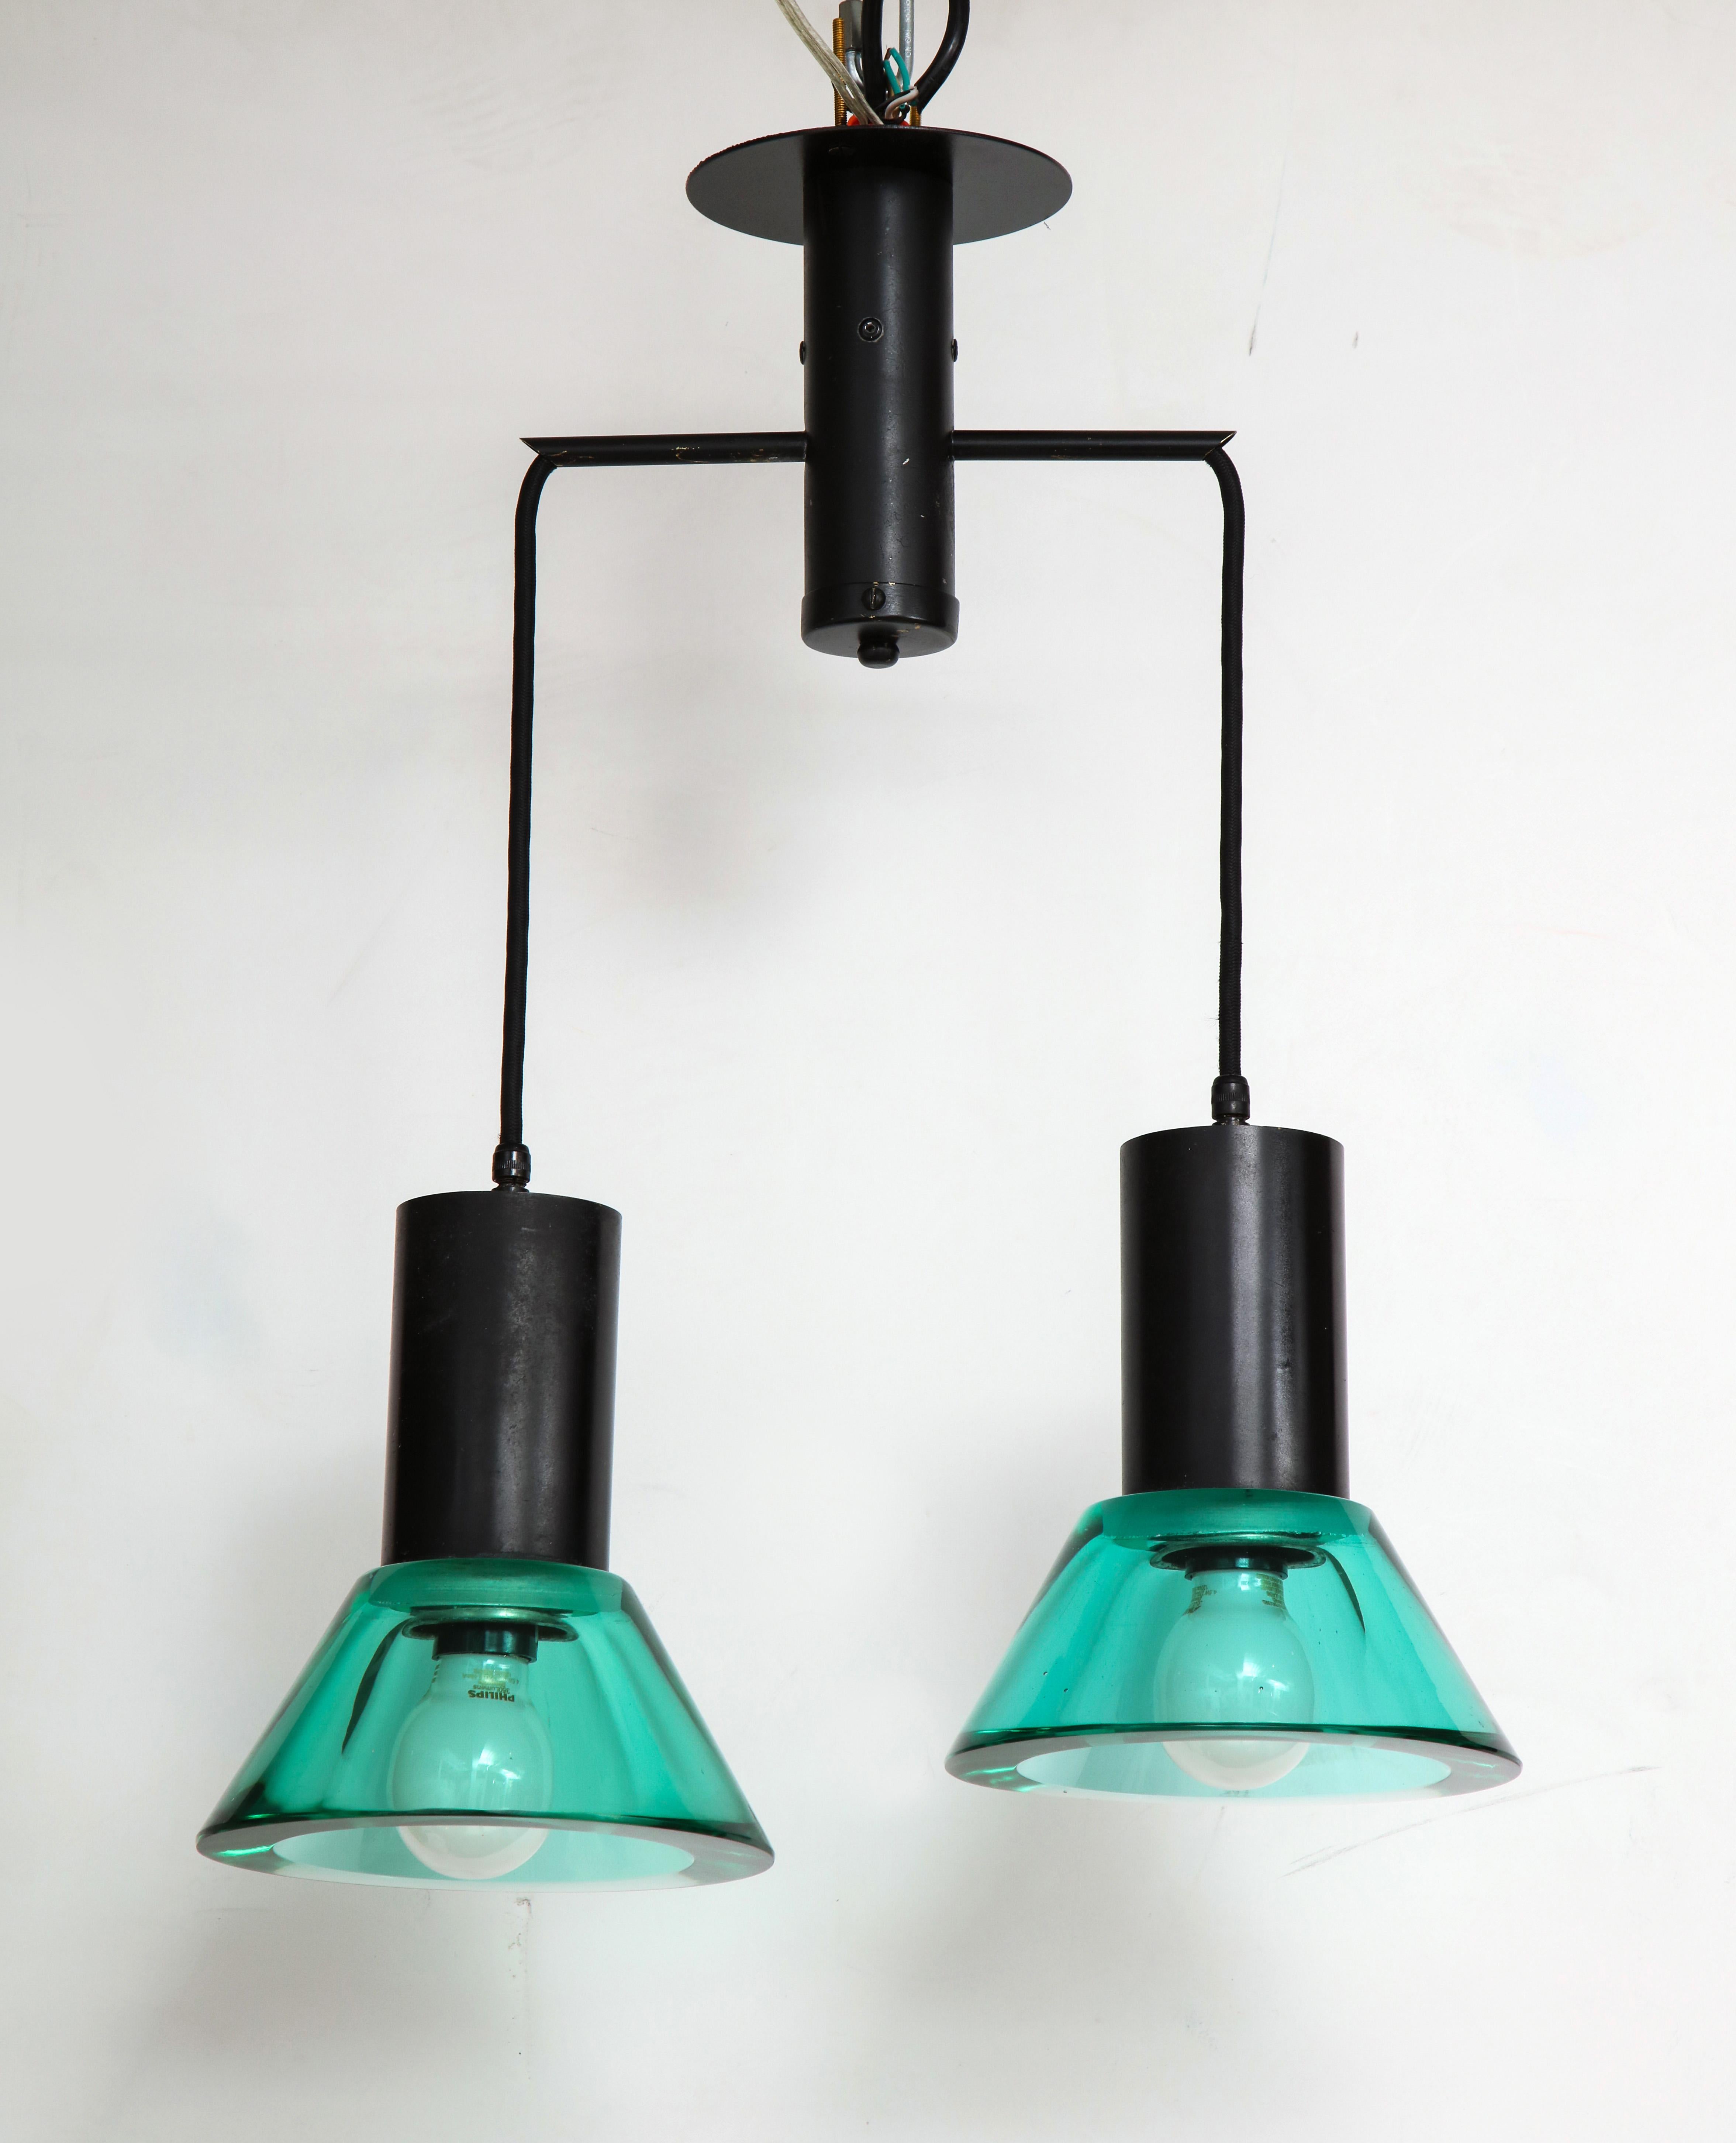 Flavio Poli Seguso dual suspension light, Venice, Italy, 1960s
Solid thick Murano glass, enamel, brass
Measures: H drop 1: 20” H drop 2”: 21” (can be adjusted)
Glass fixture height 8”, diameter 7”.